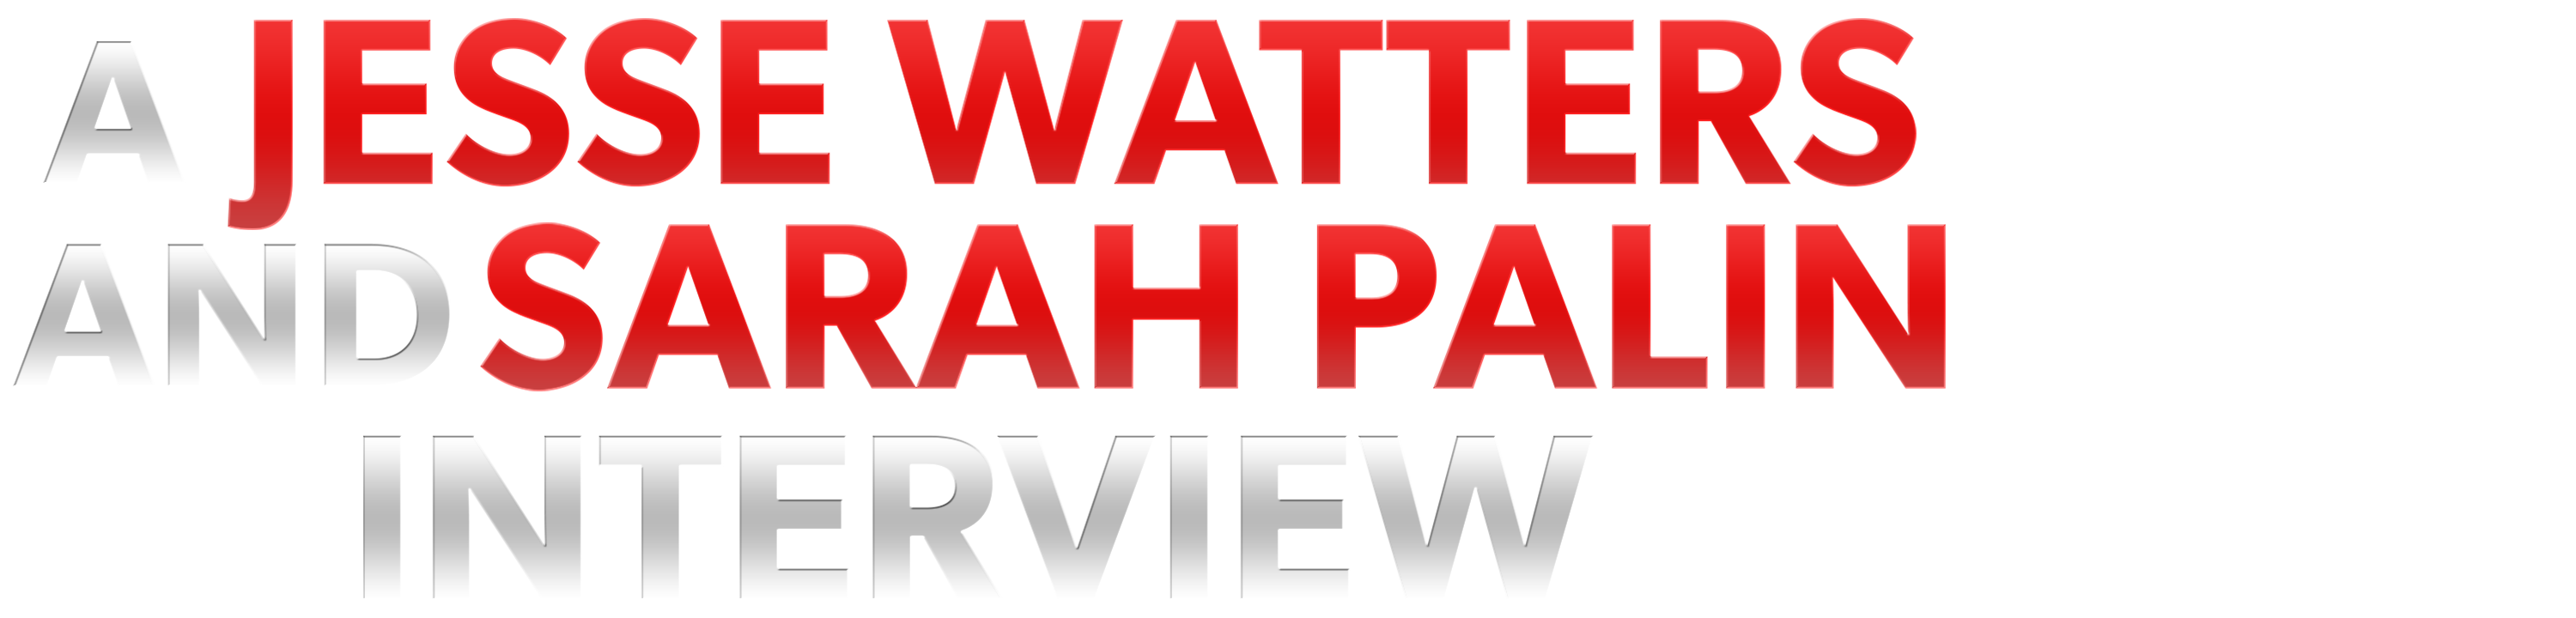 A Jesse Watters and Sarah Palin Interview logo